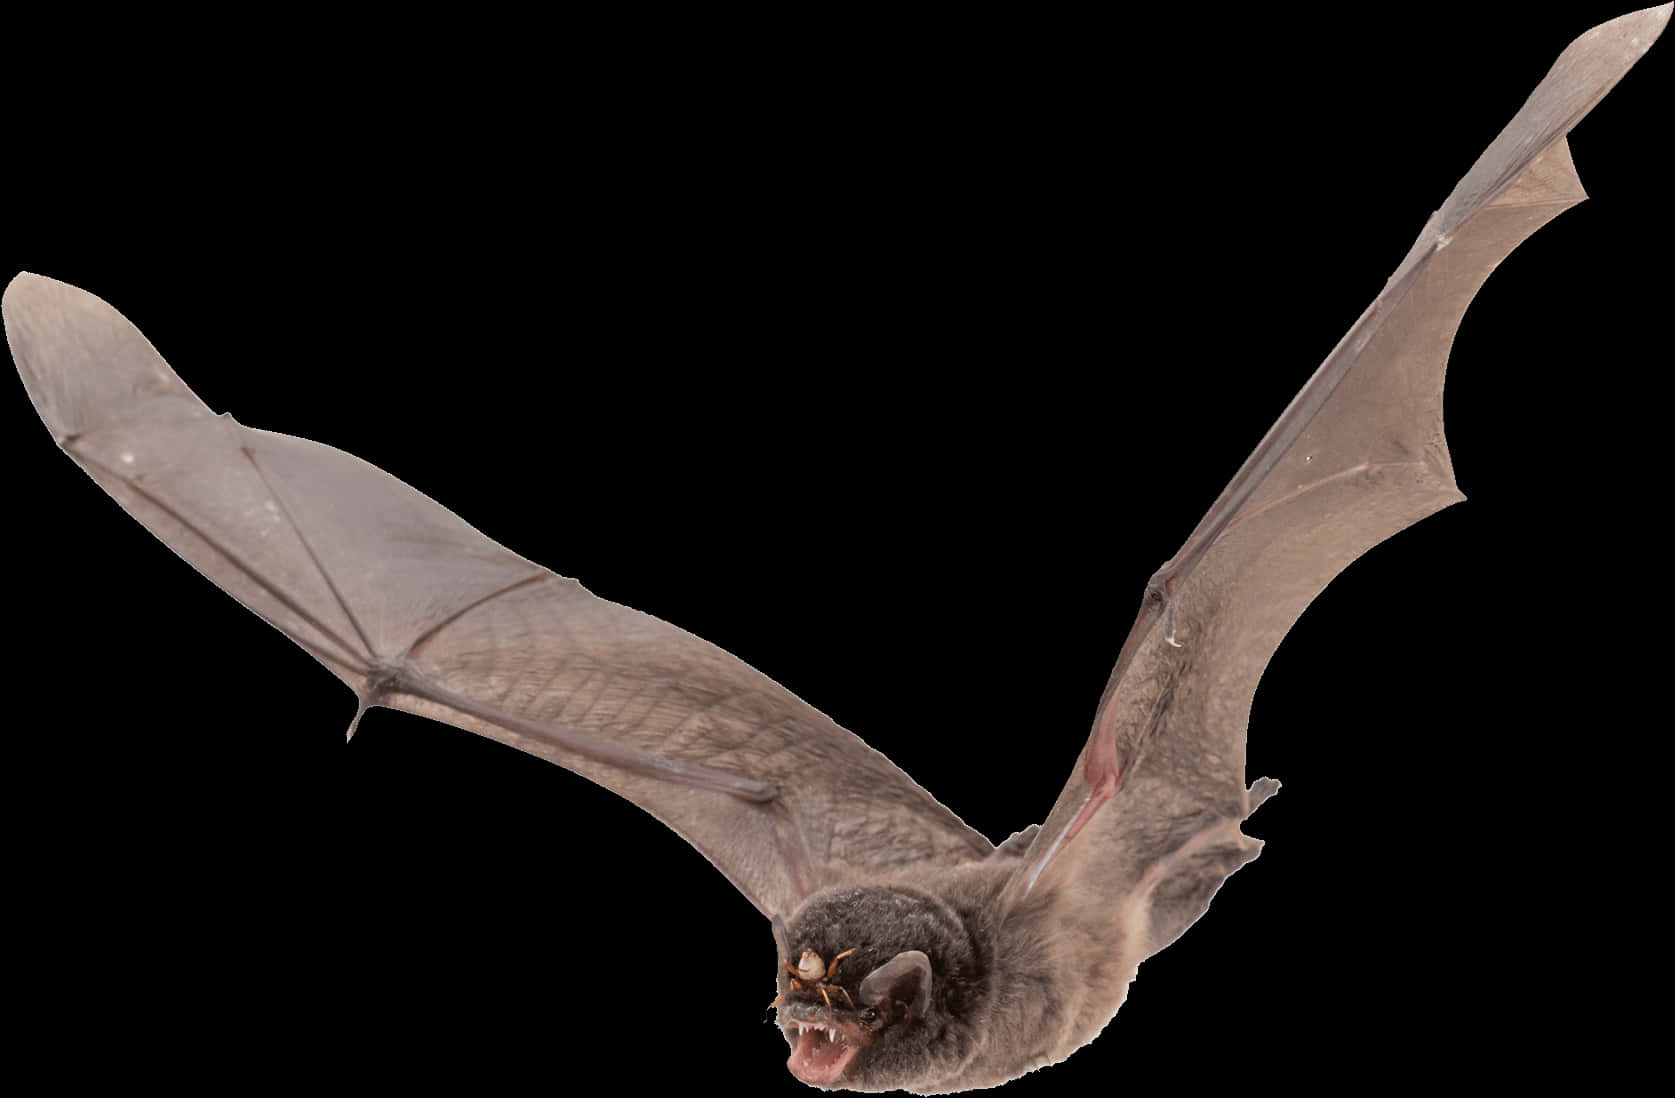 A Bat With Wings Spread